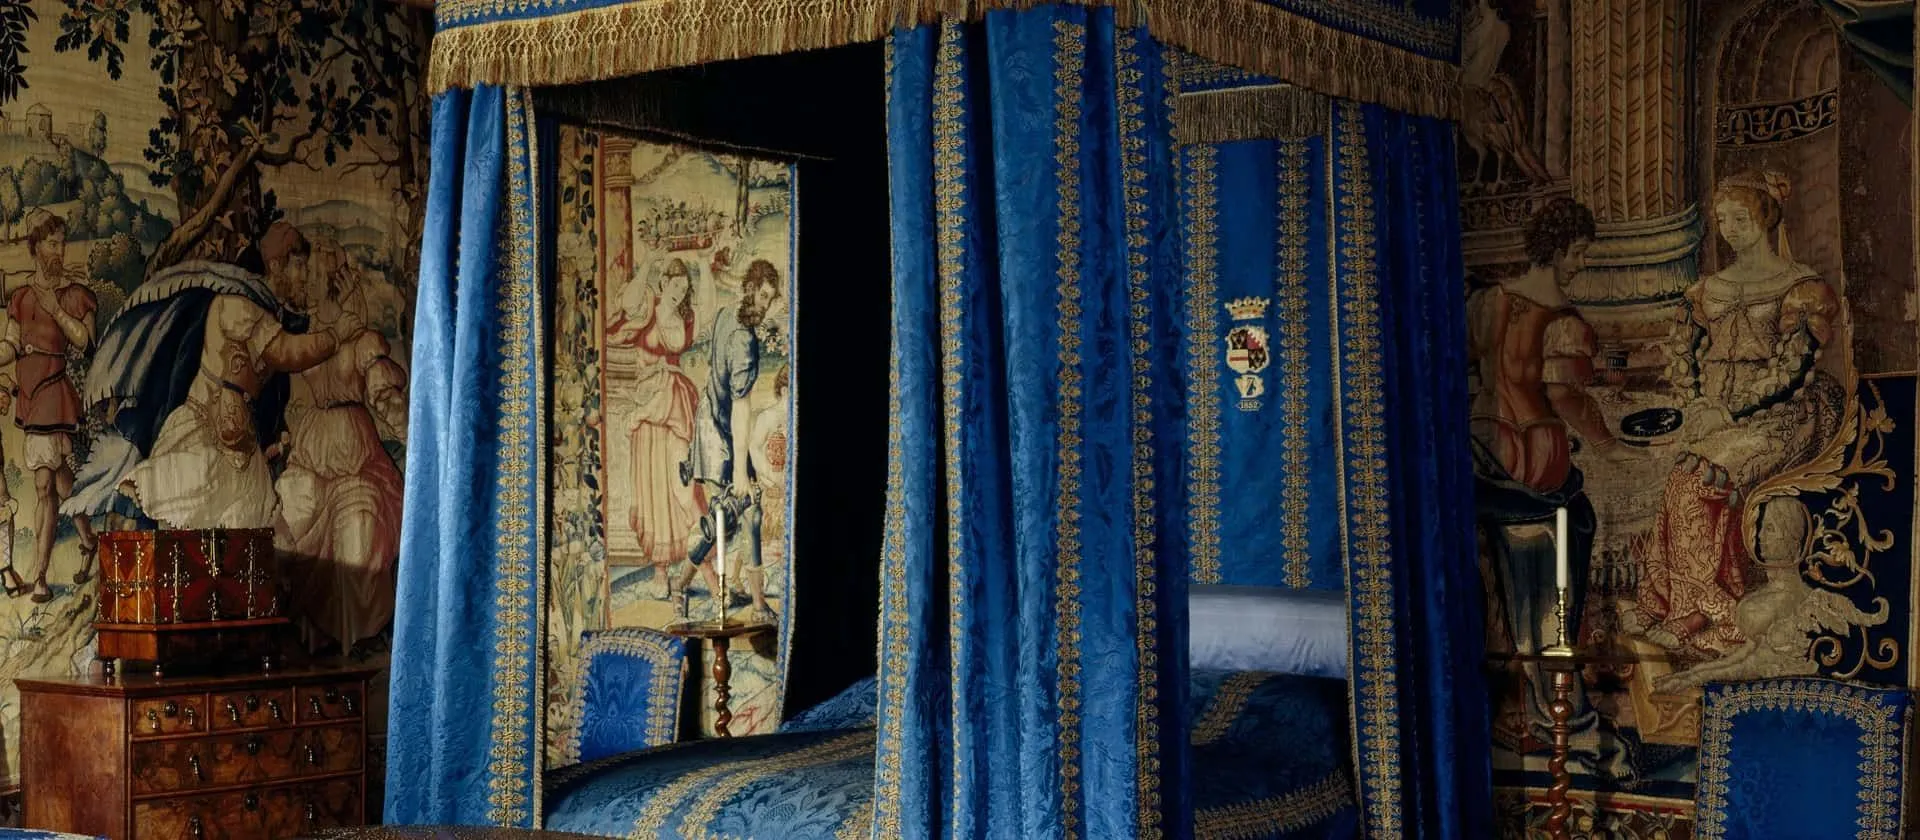 The blue bed inside Hardwick Hall.